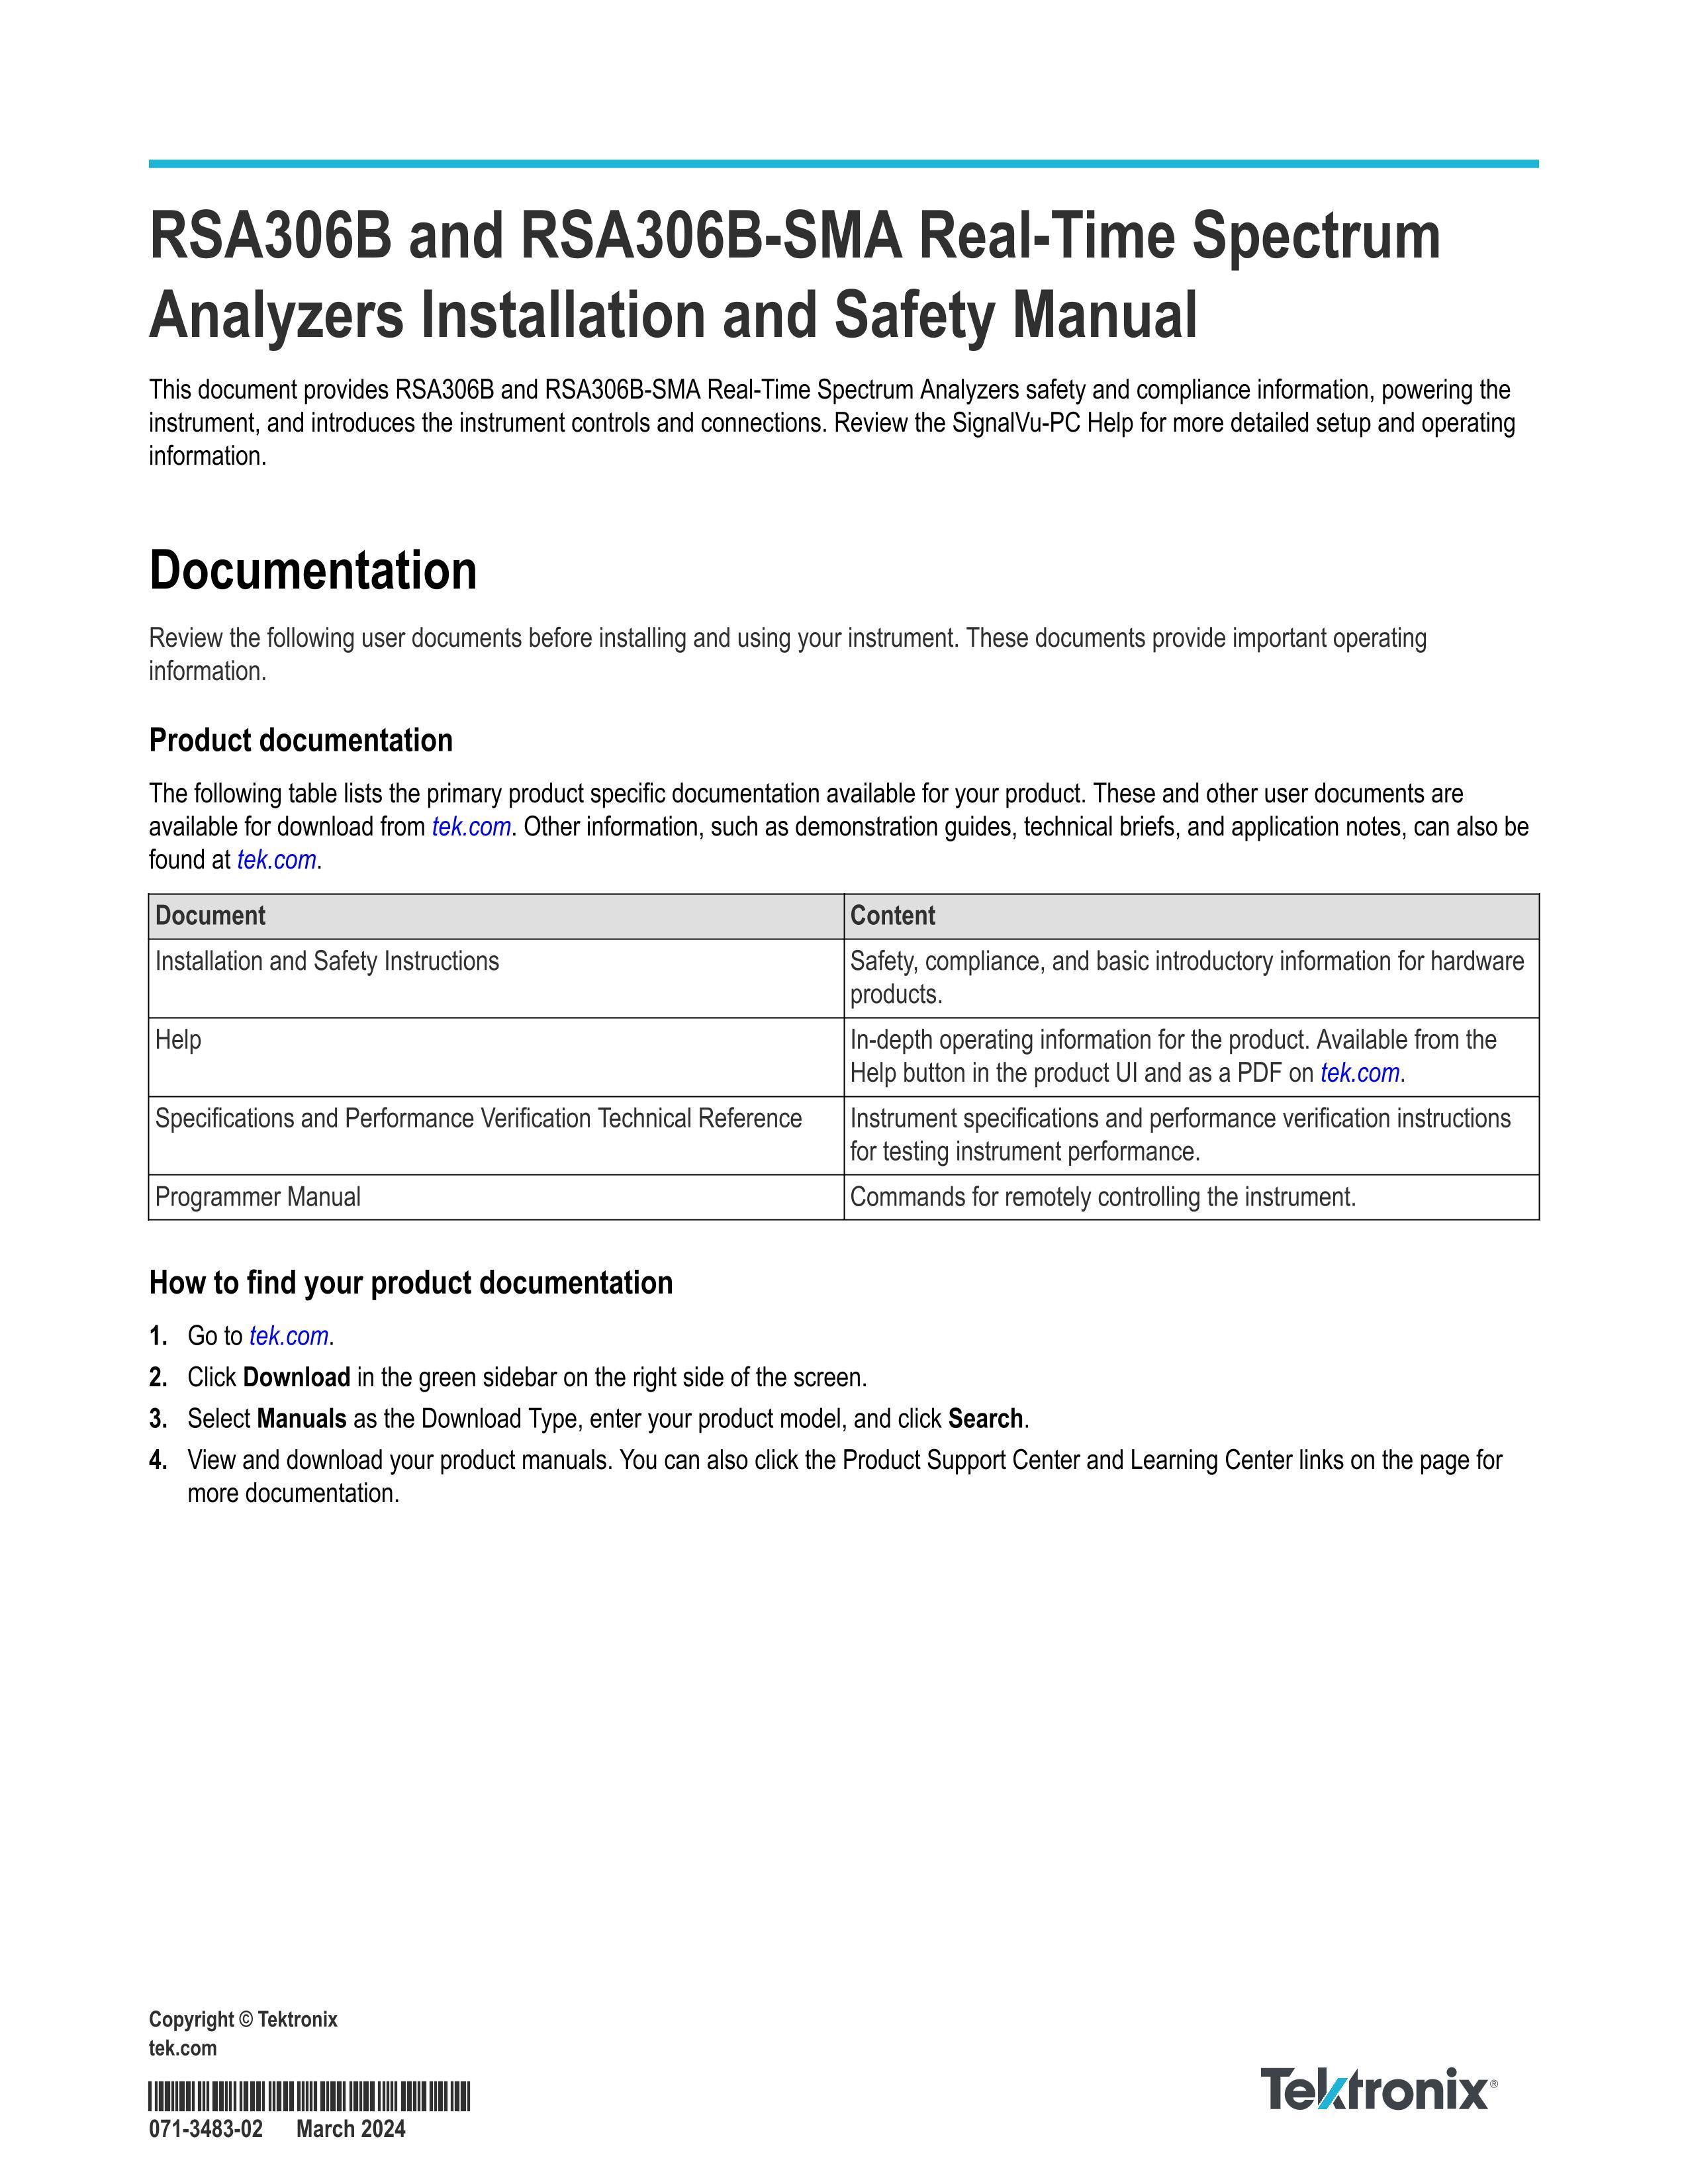 RSA306B and RSA306B-SMA Real-Time Spectrum Analyzers Installation and Safety Manual1ҳ